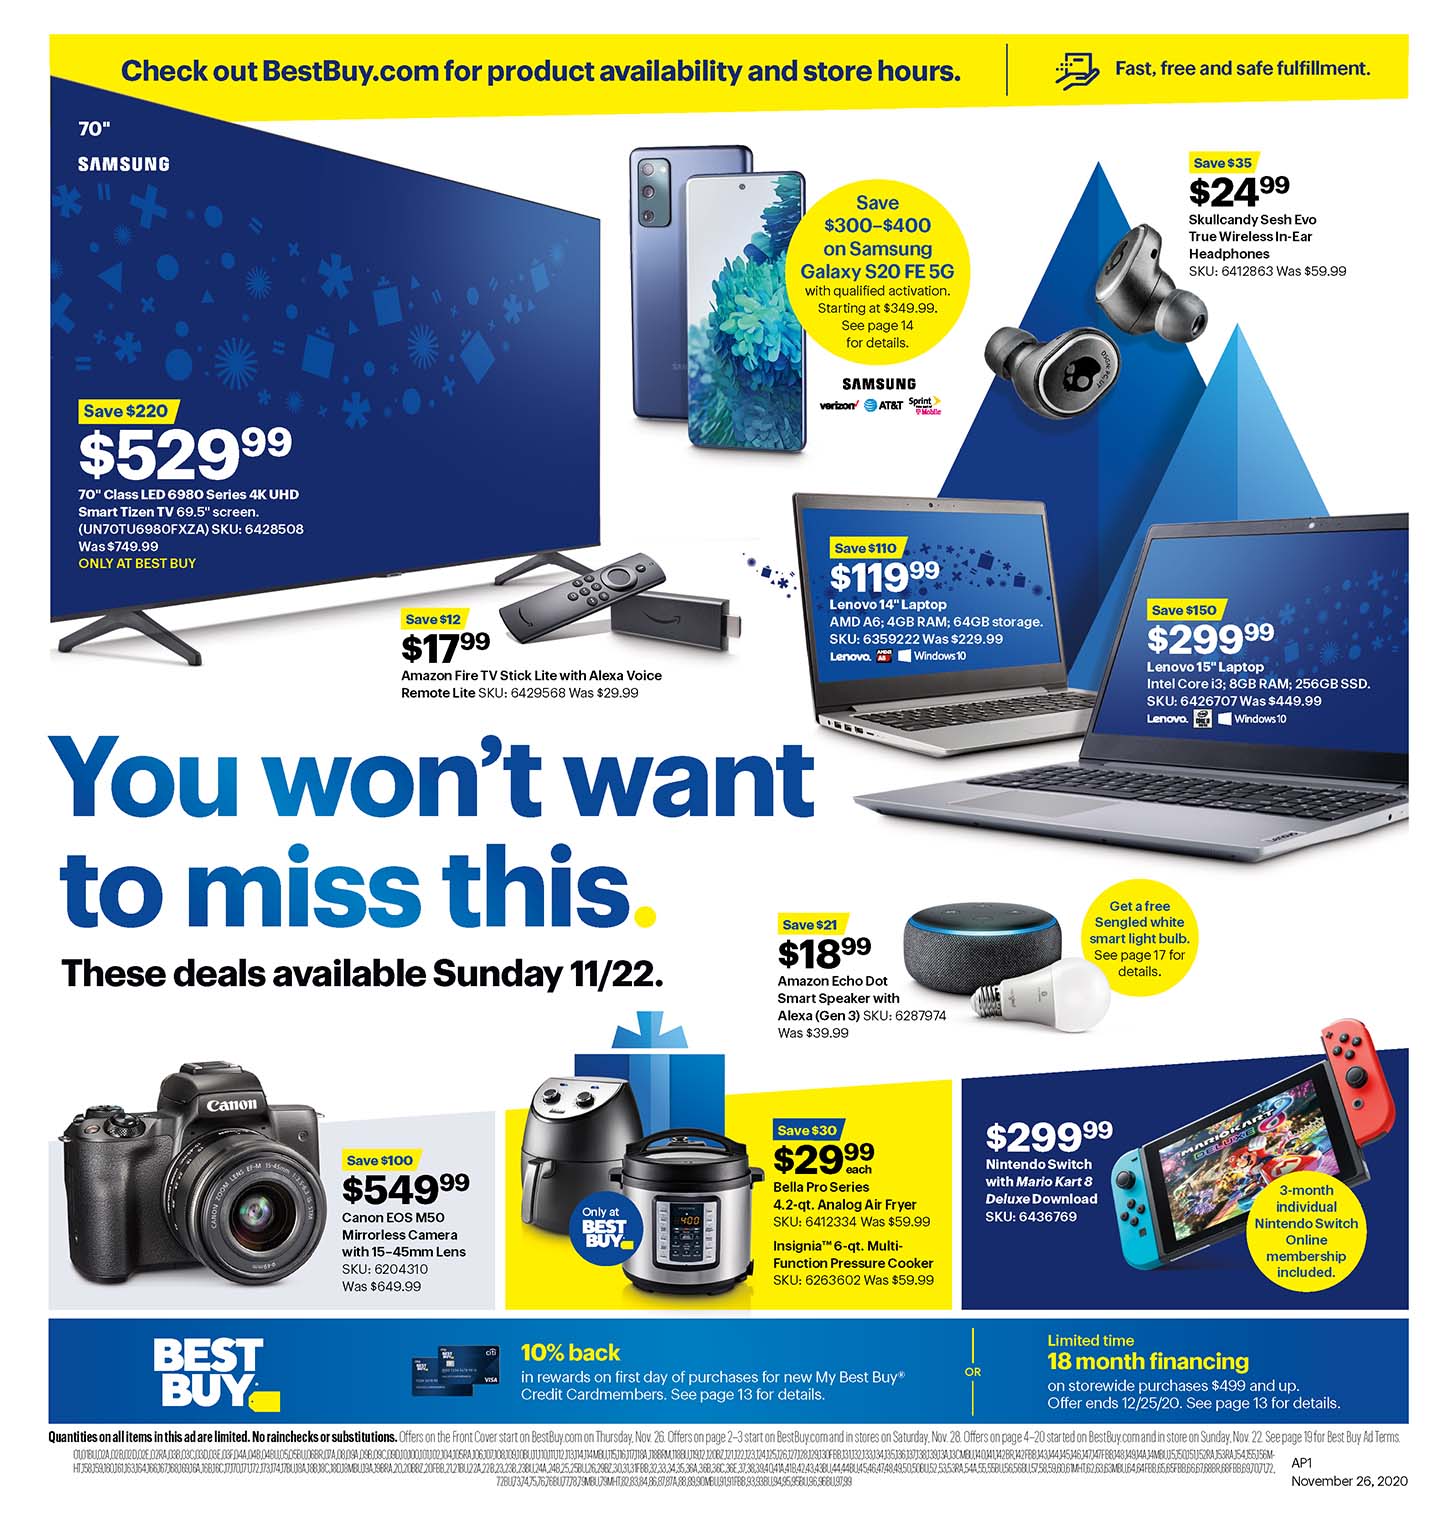 Best Buy Black Friday Ad 2020 - Will Hotels Have Black Friday Deals